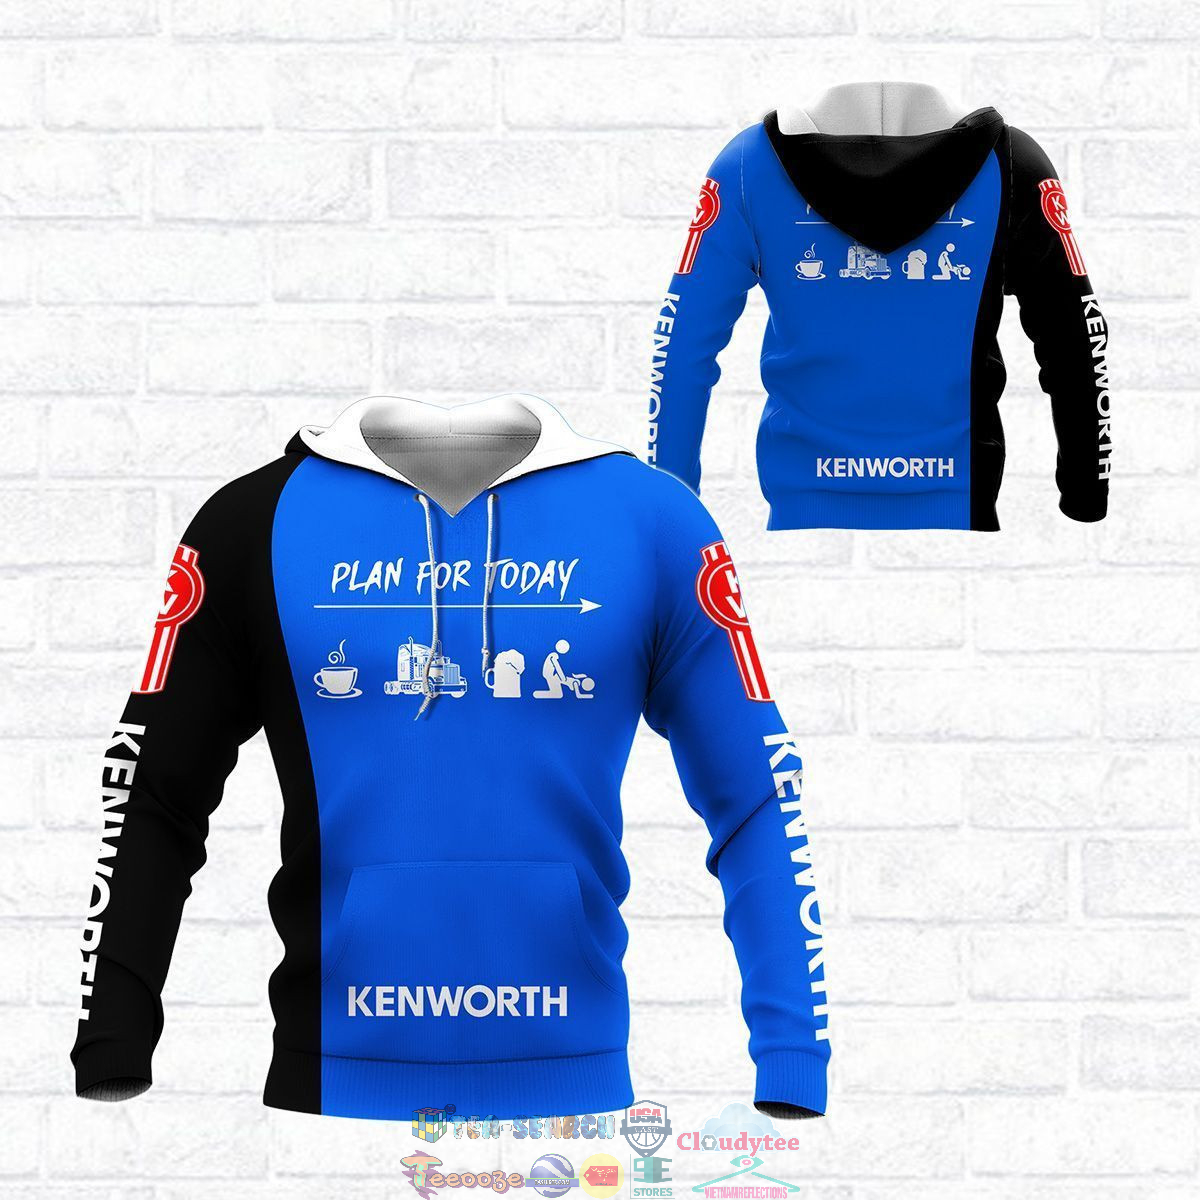 Kenworth Plan For Today ver 3 3D hoodie and t-shirt